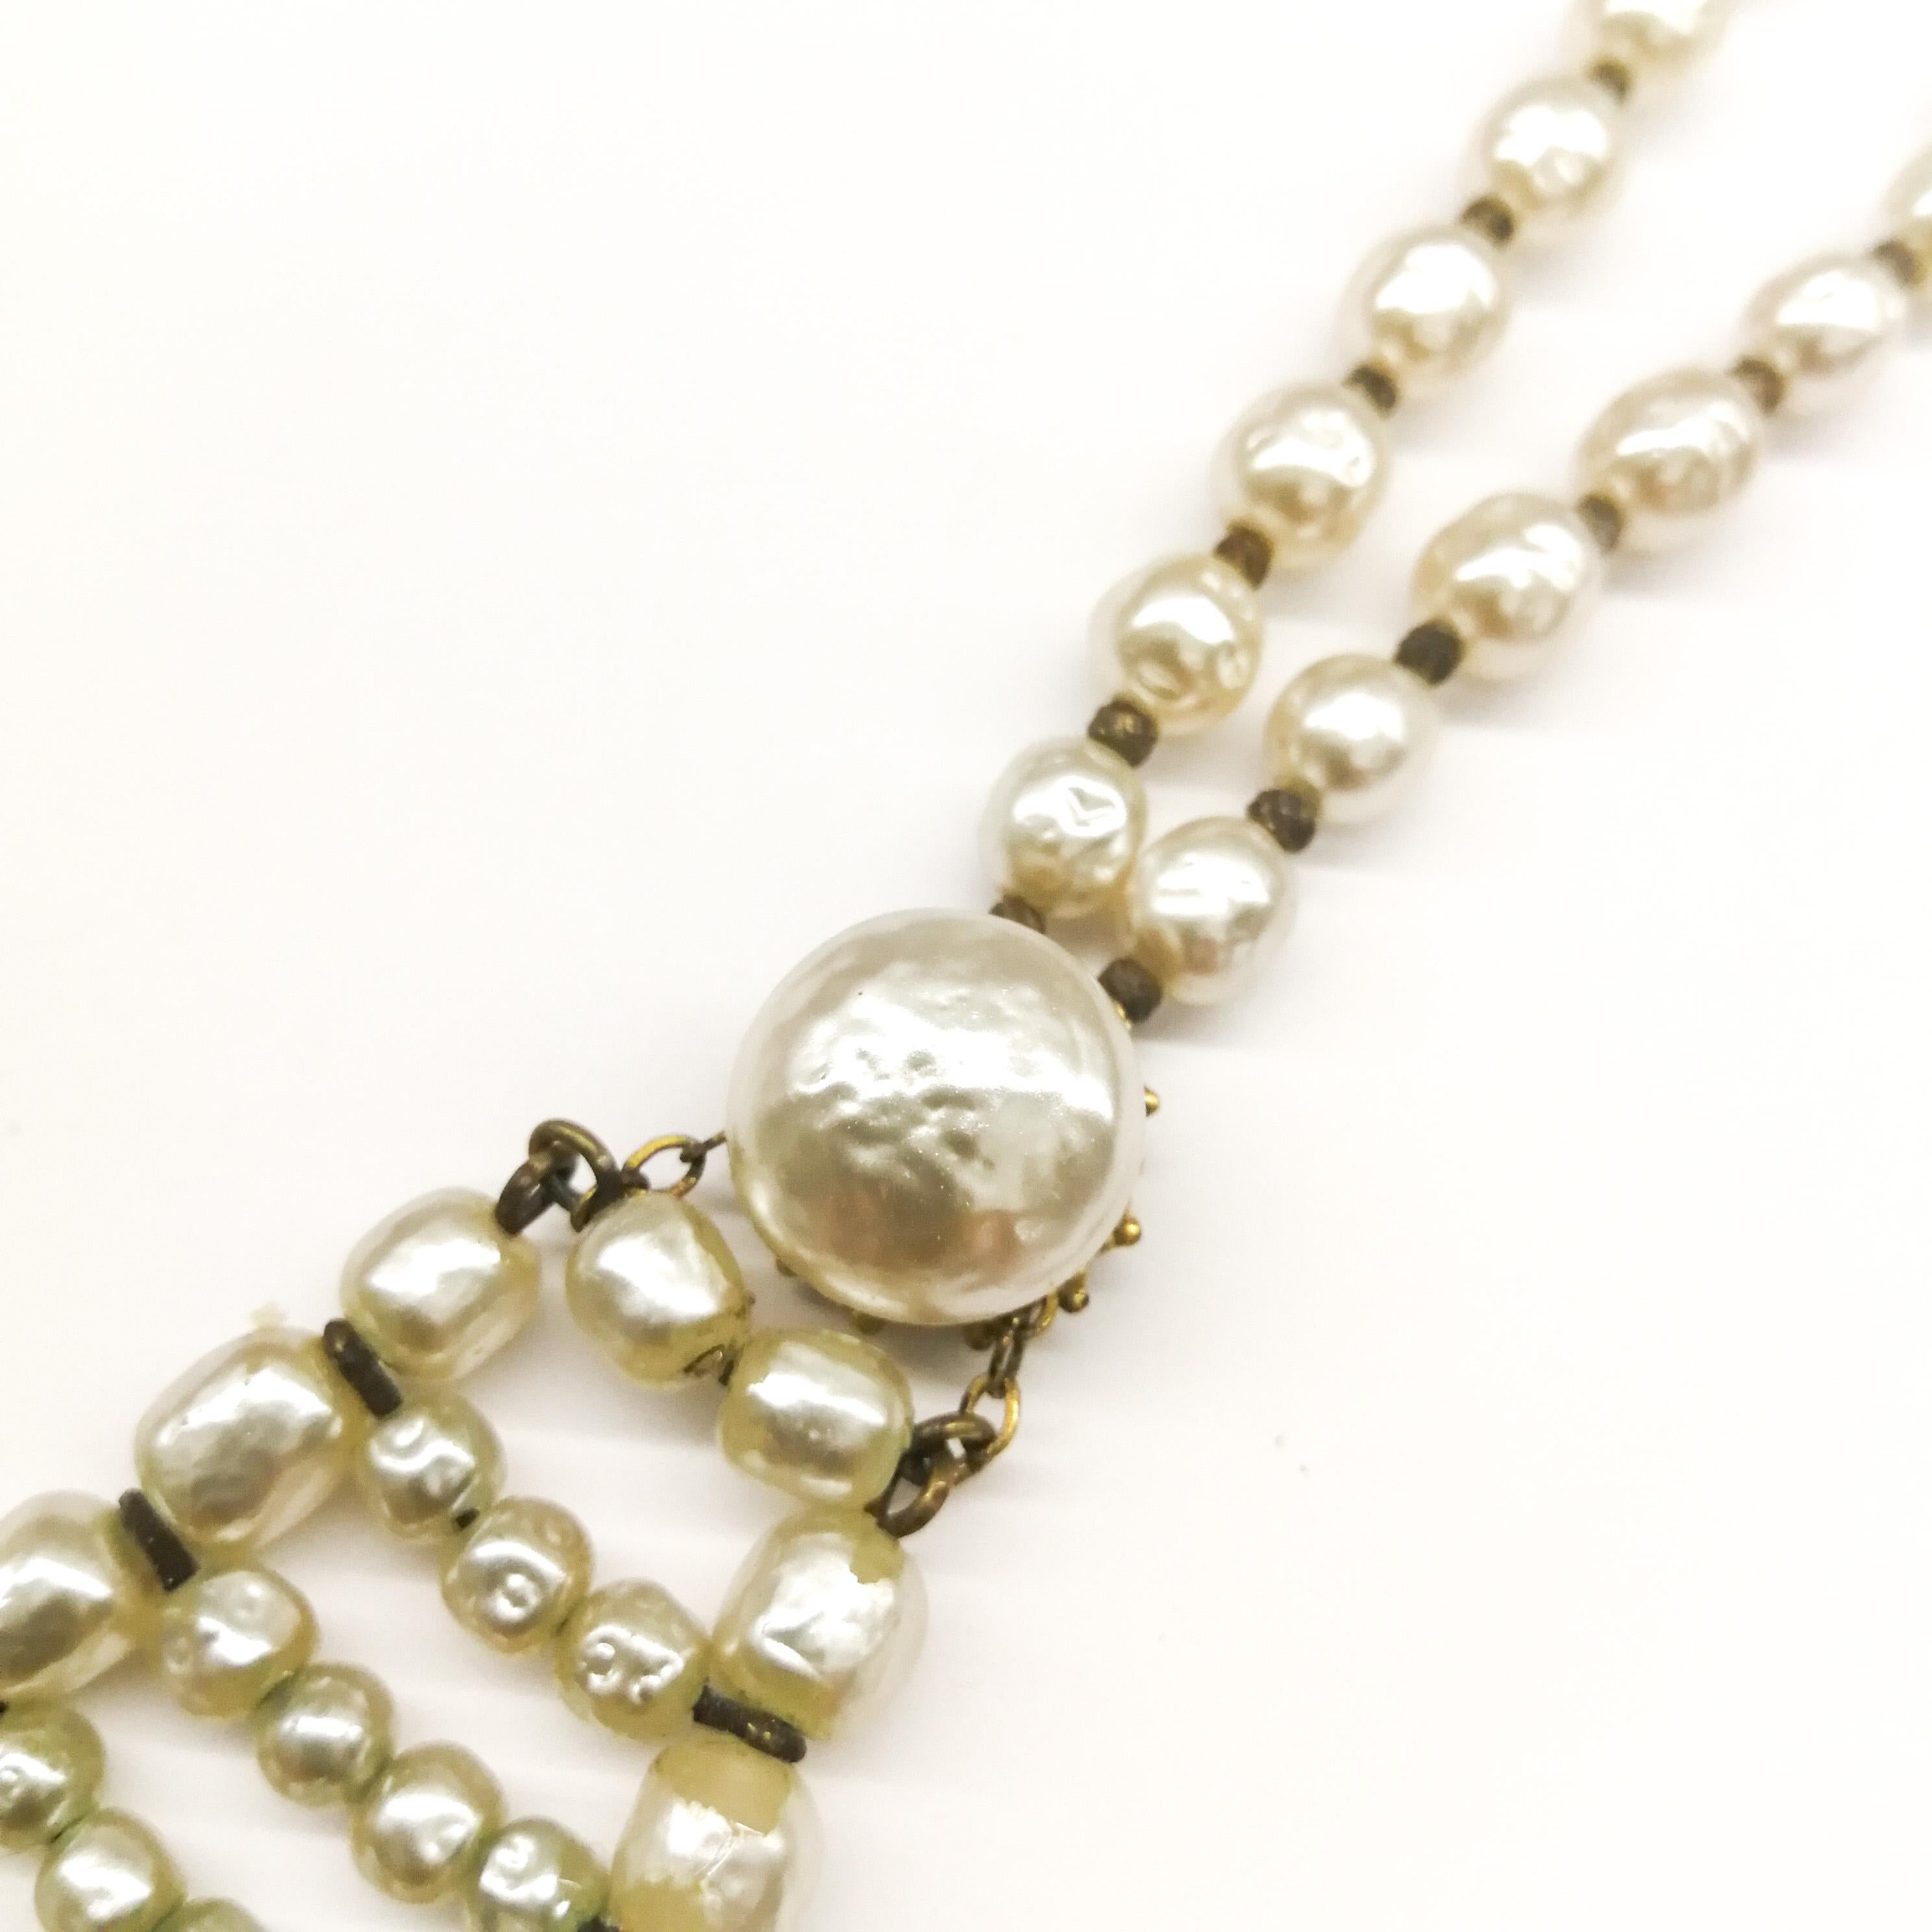 Women's A long baroque pearl pendant necklace, Miriam Haskell, 1960s